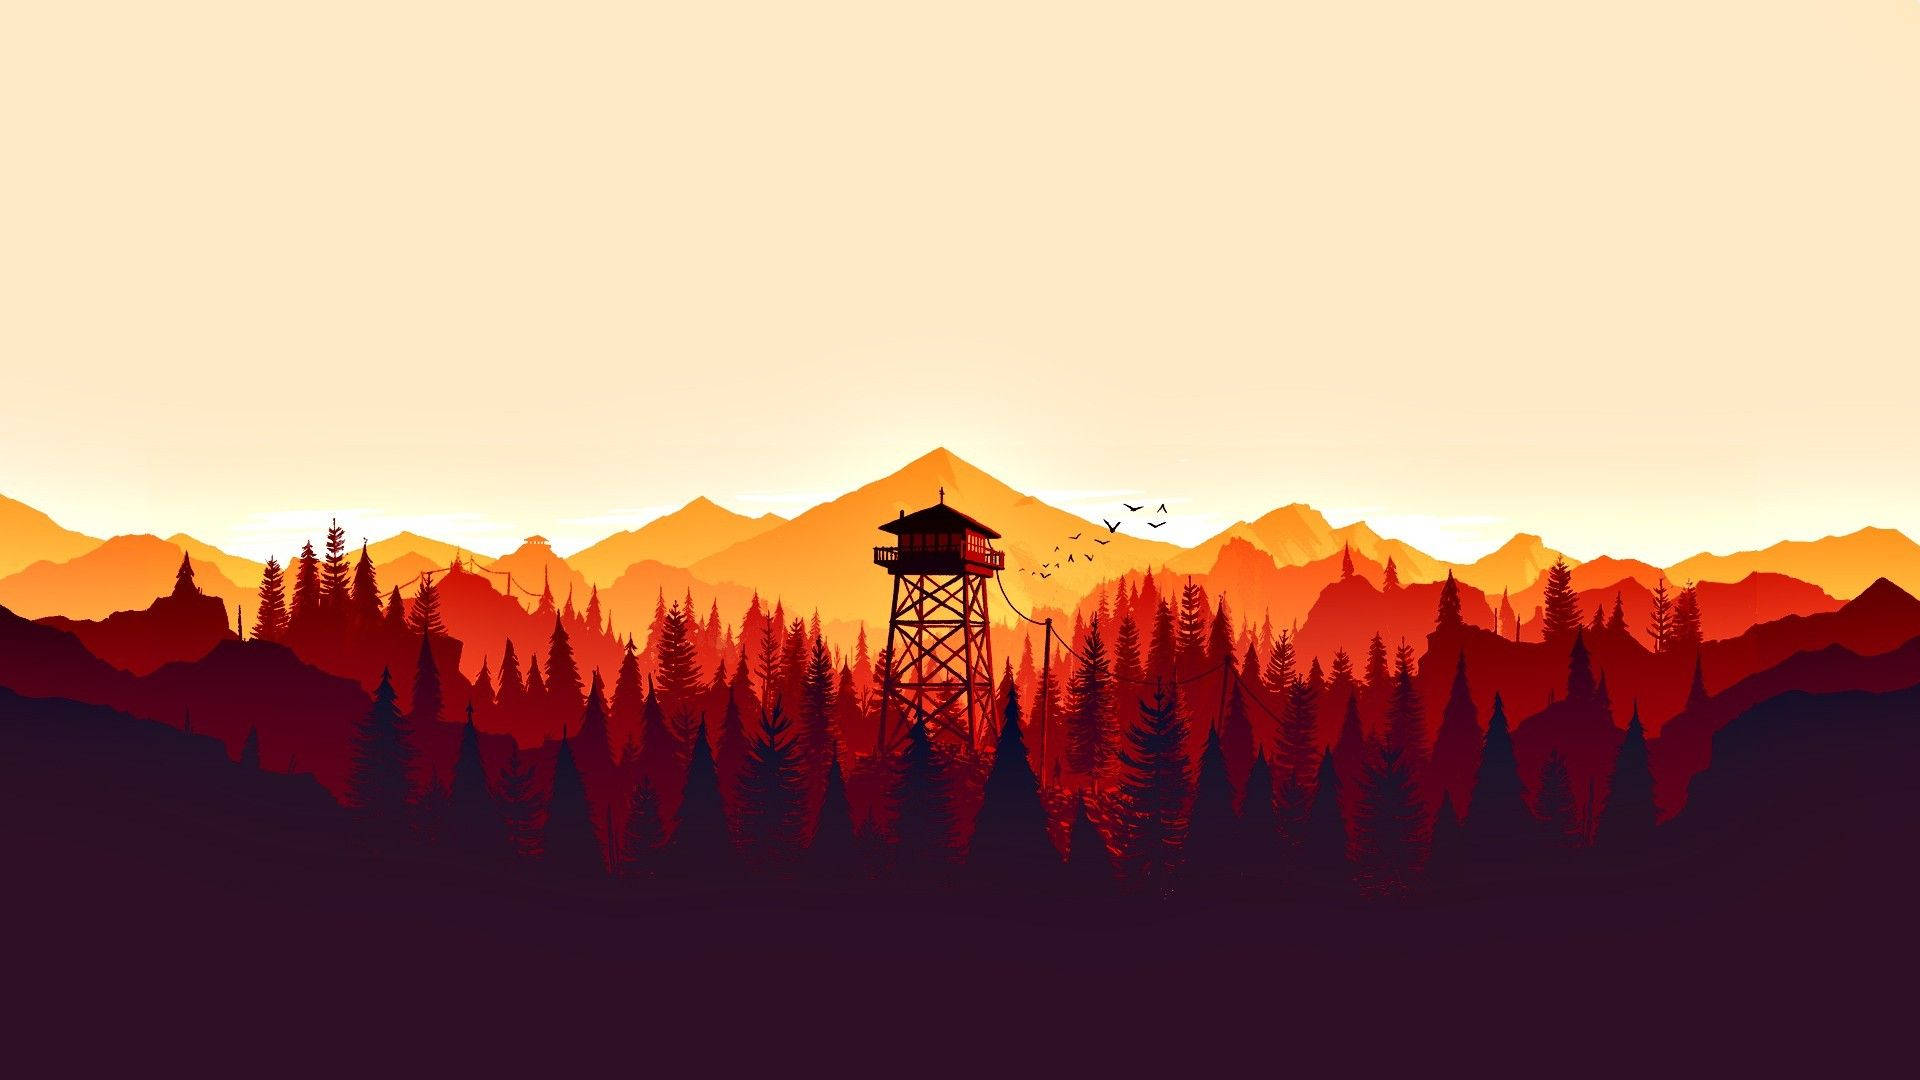 Firewatch Mobile Wallpapers, HD Firewatch Backgrounds, Free Images Download